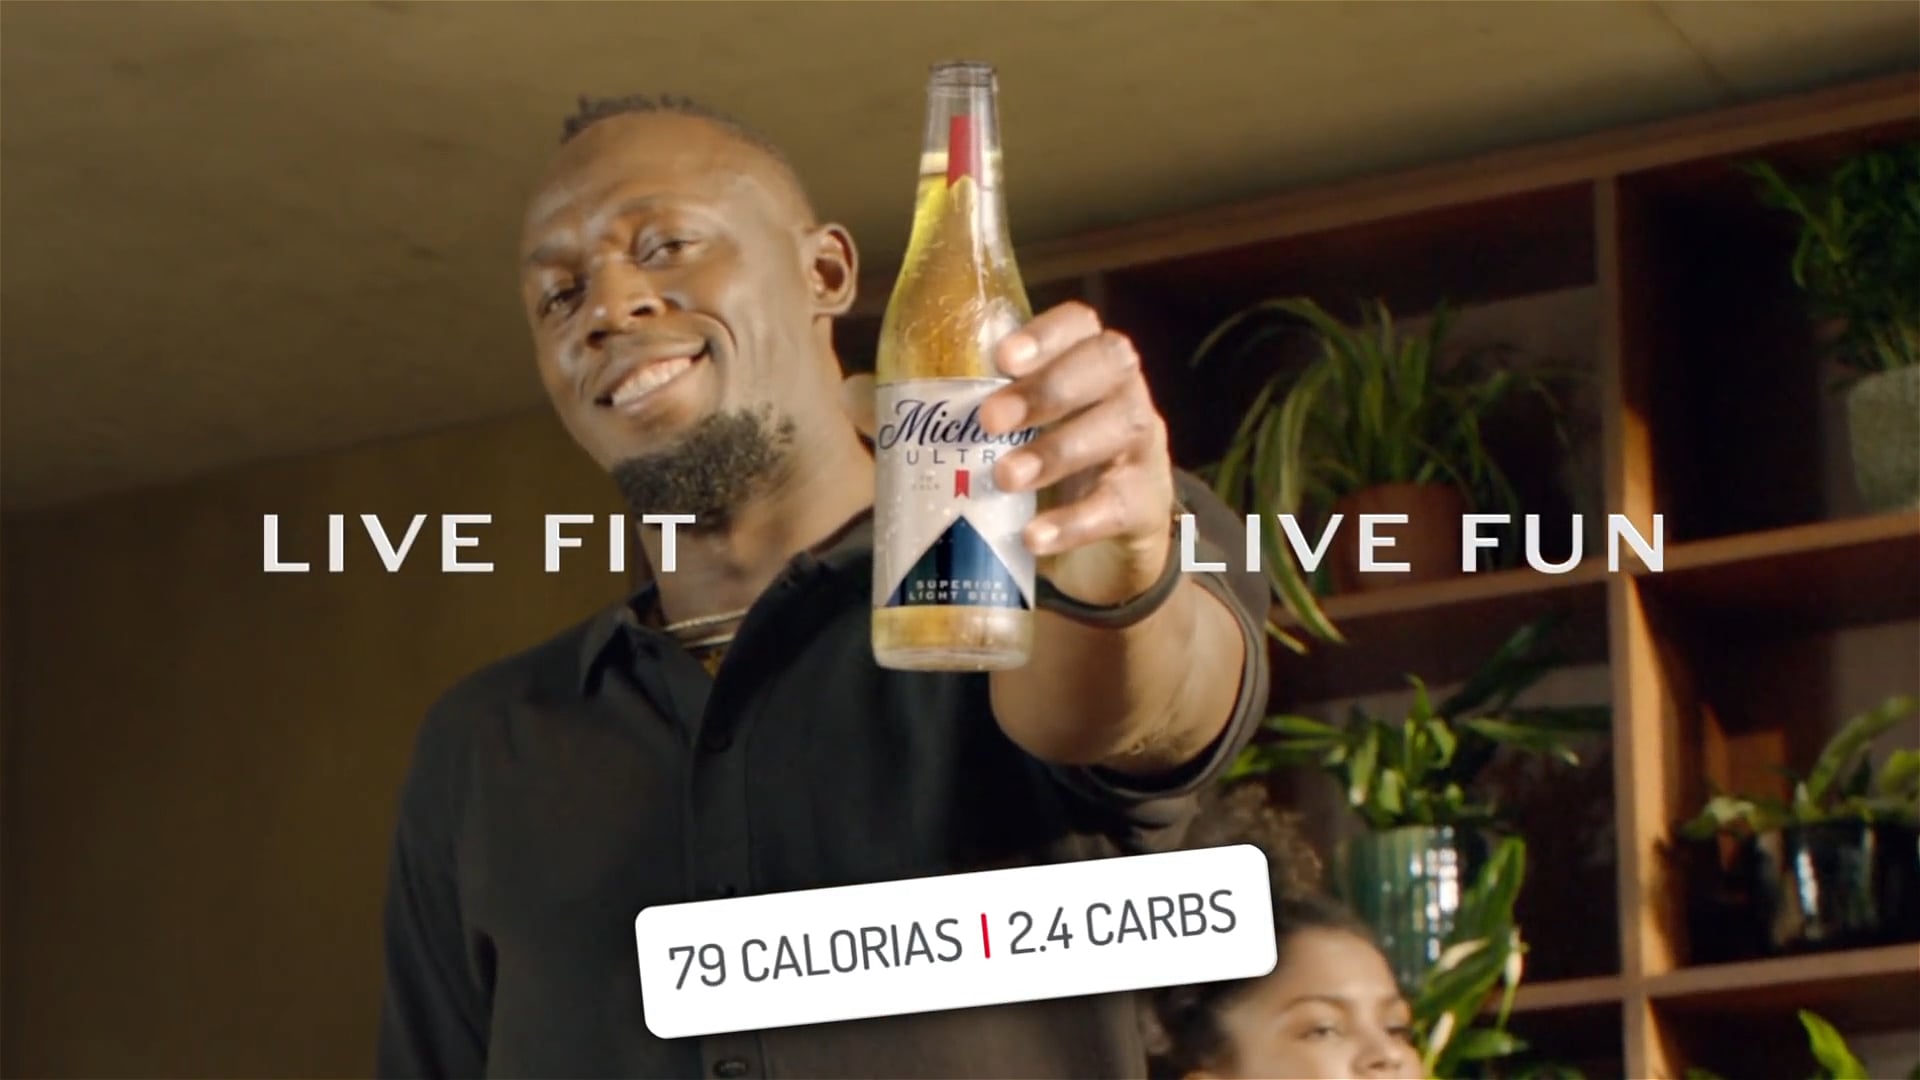 Usain Bolt´s Live Fit, Live Fun, Michelob Ultra commercial.